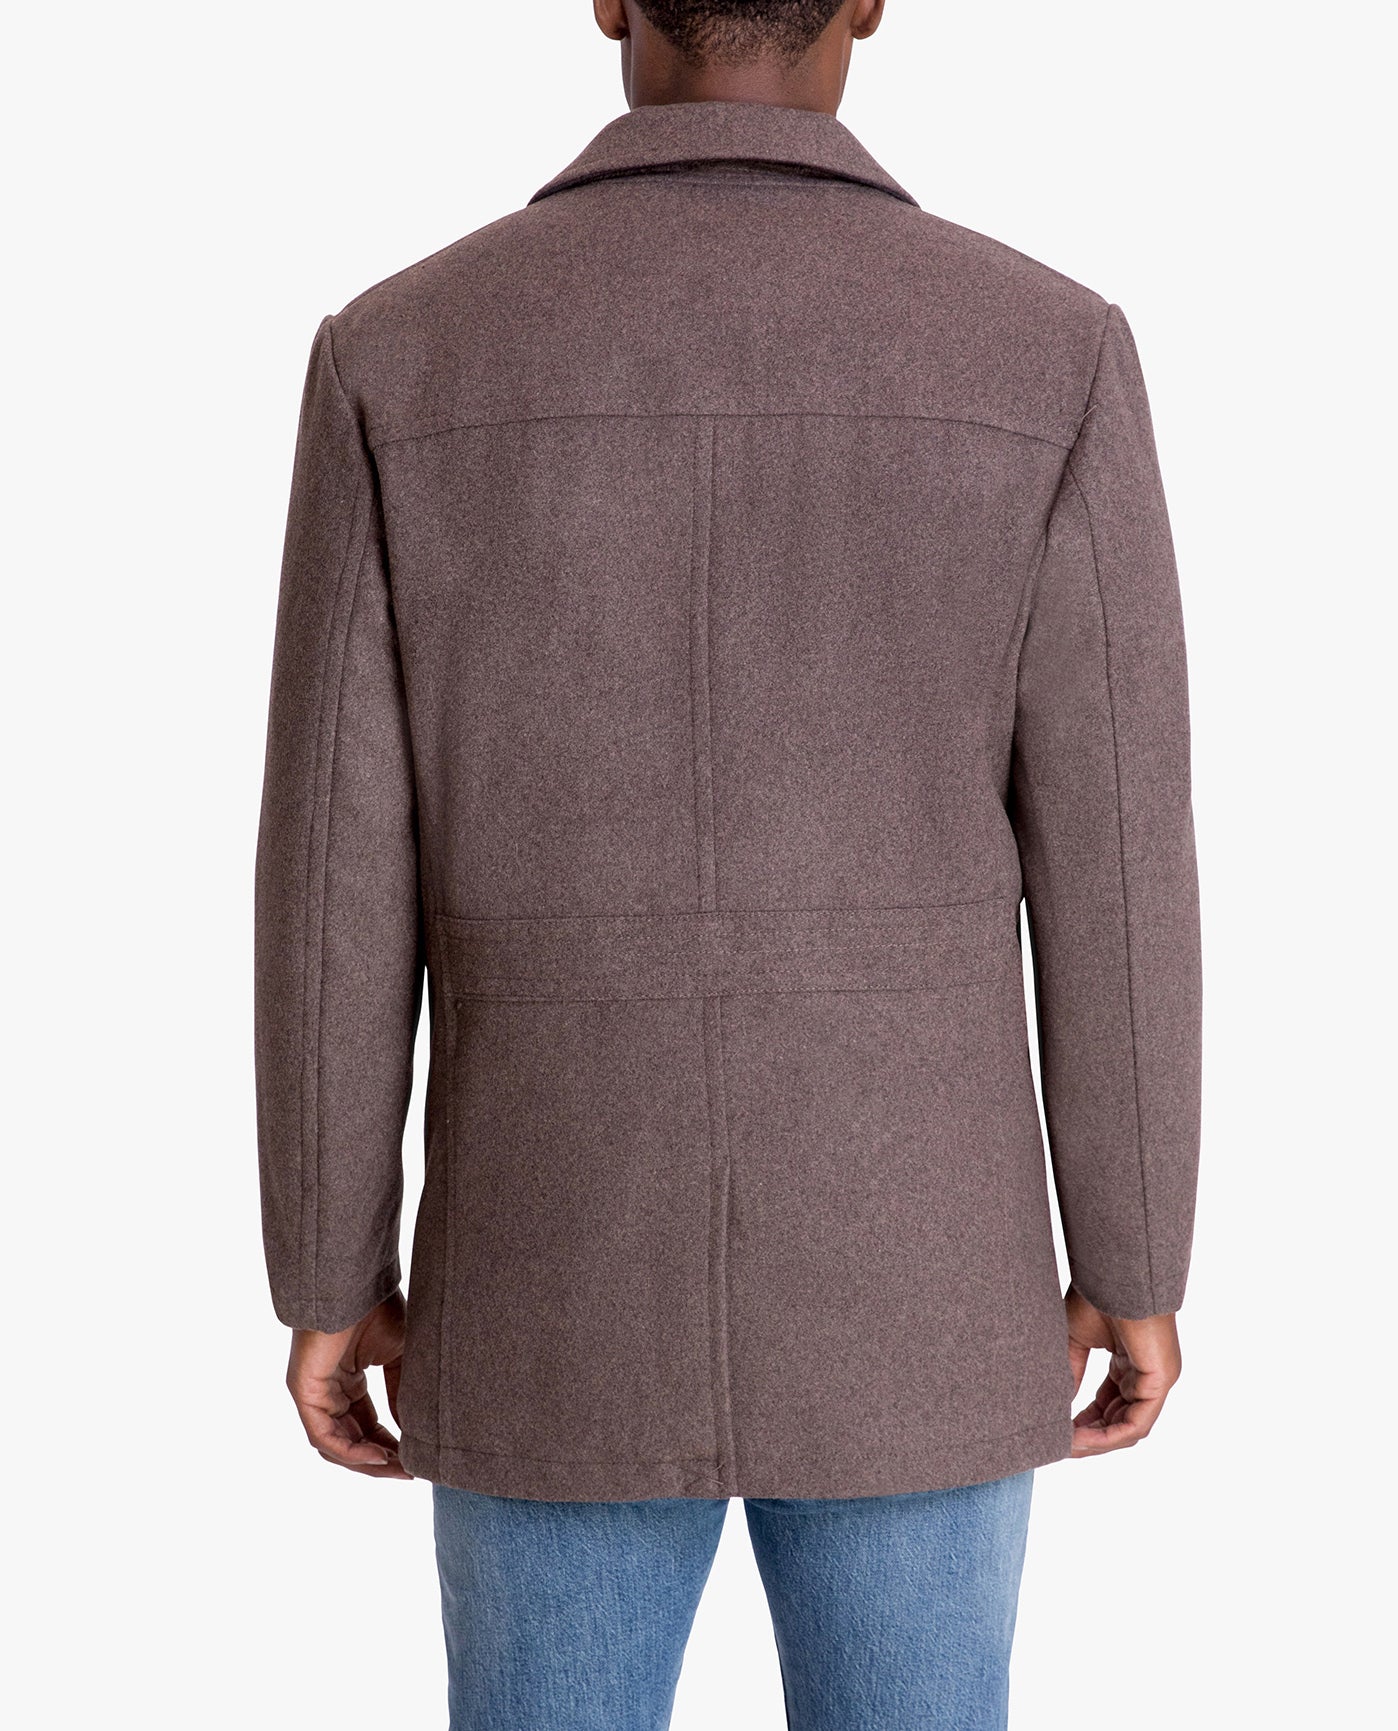 BACK VIEW OF AMITY SINGLE BREASTED WOOL JACKET | NEW CHARCOAL